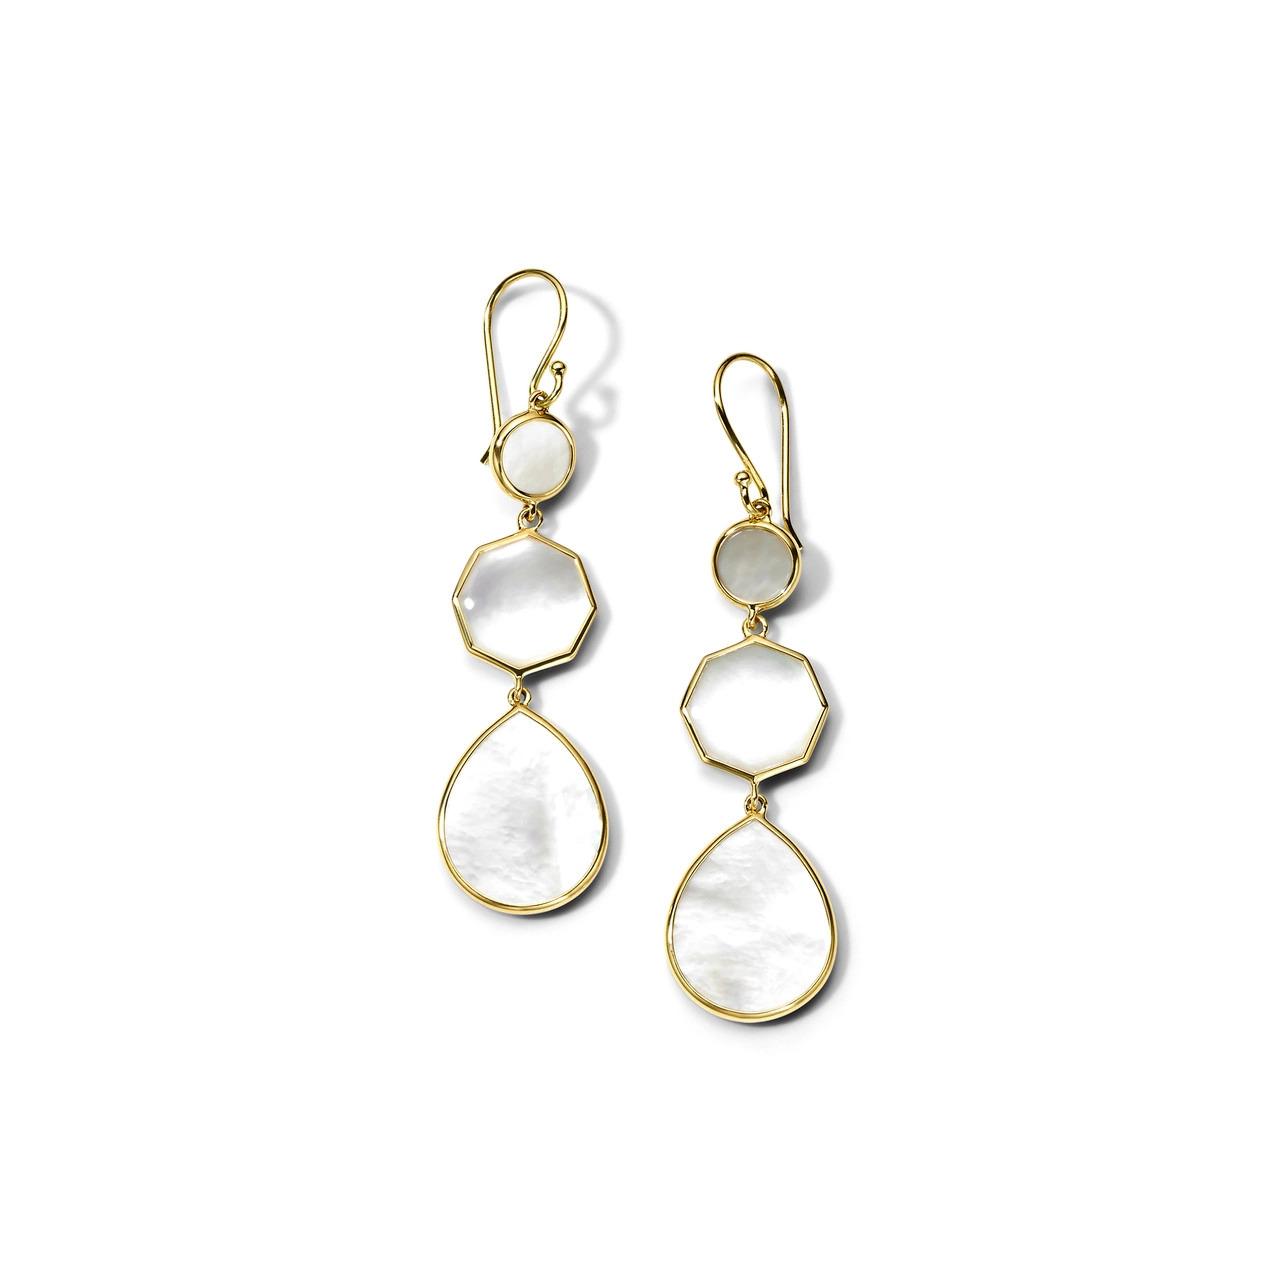 Ippolita 18k Polished Rock Candy Small Crazy 8's Earrings 0